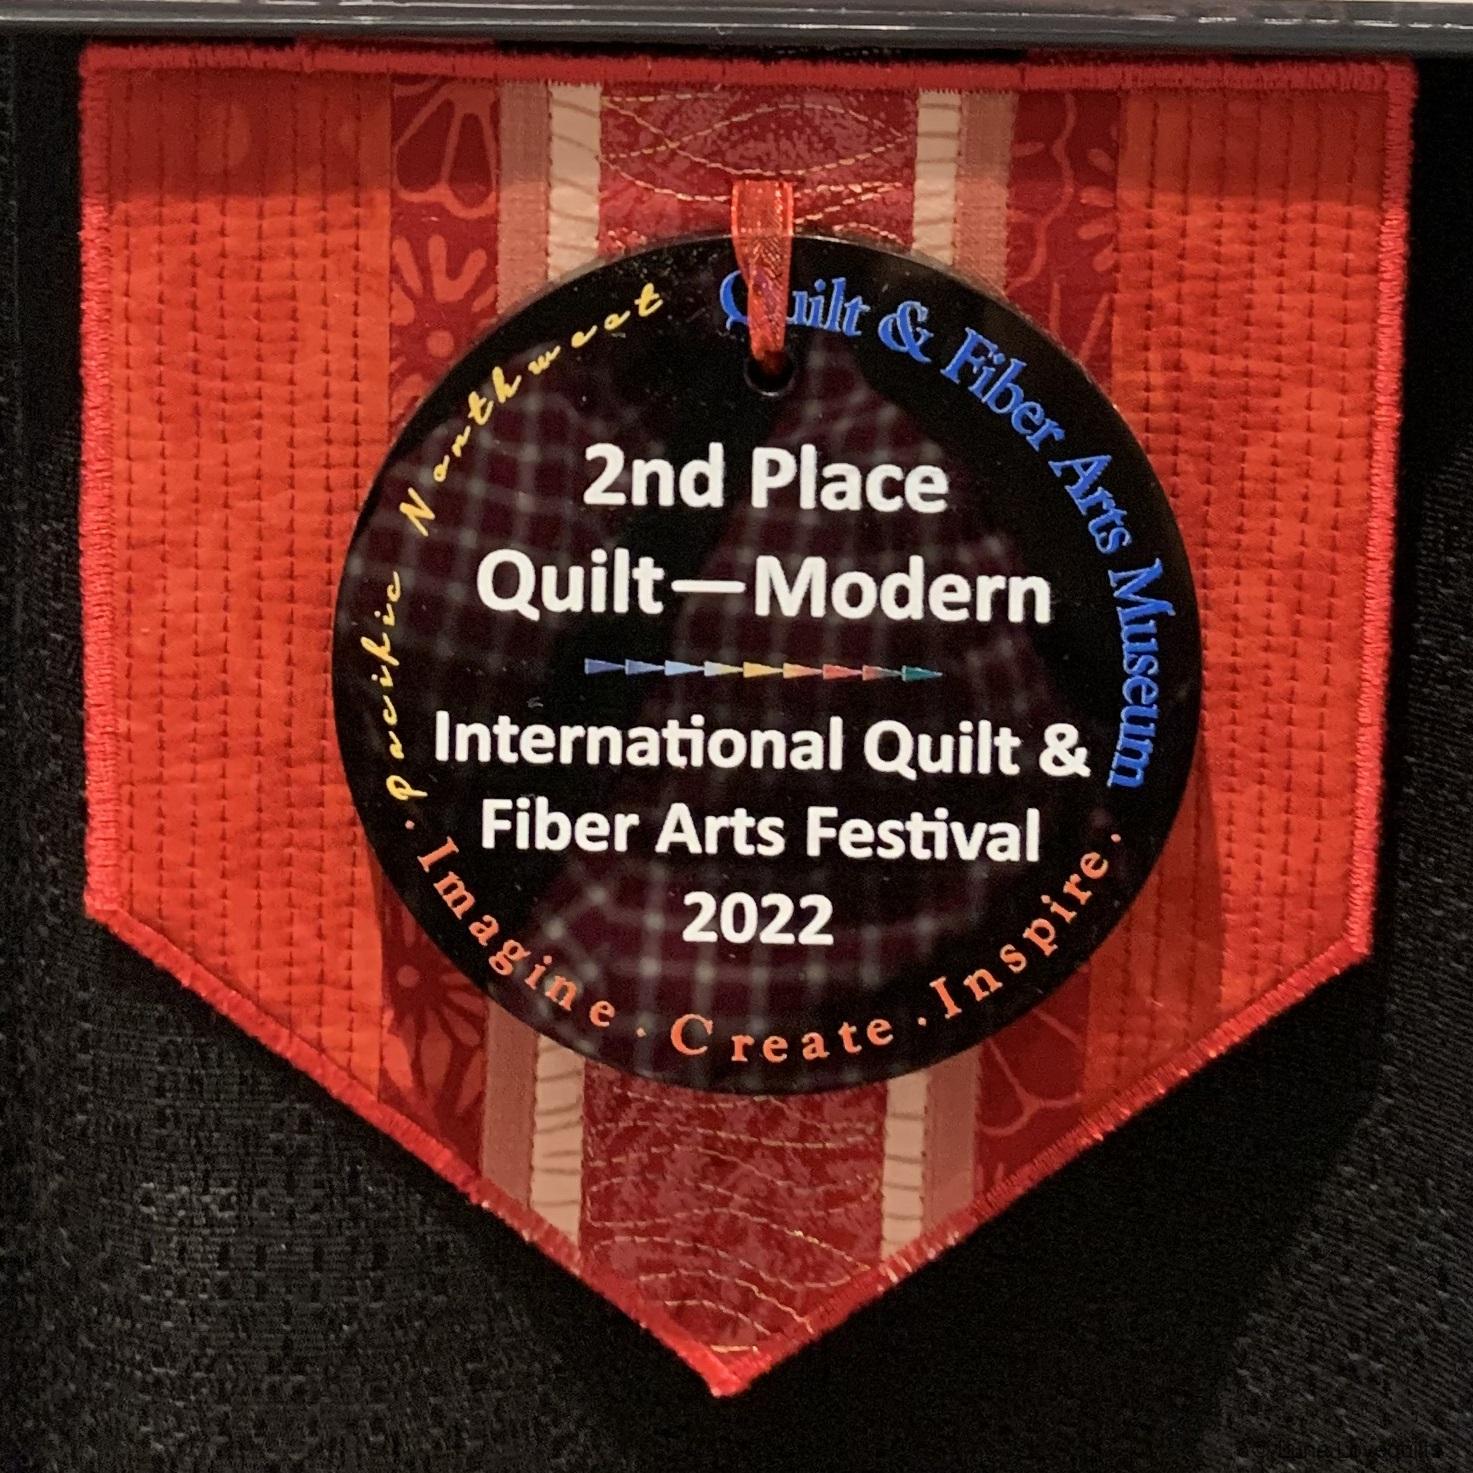 Luna Lovequilts - Second place of Modern Quilt category at Quilt & Fiber Arts Festival 2022